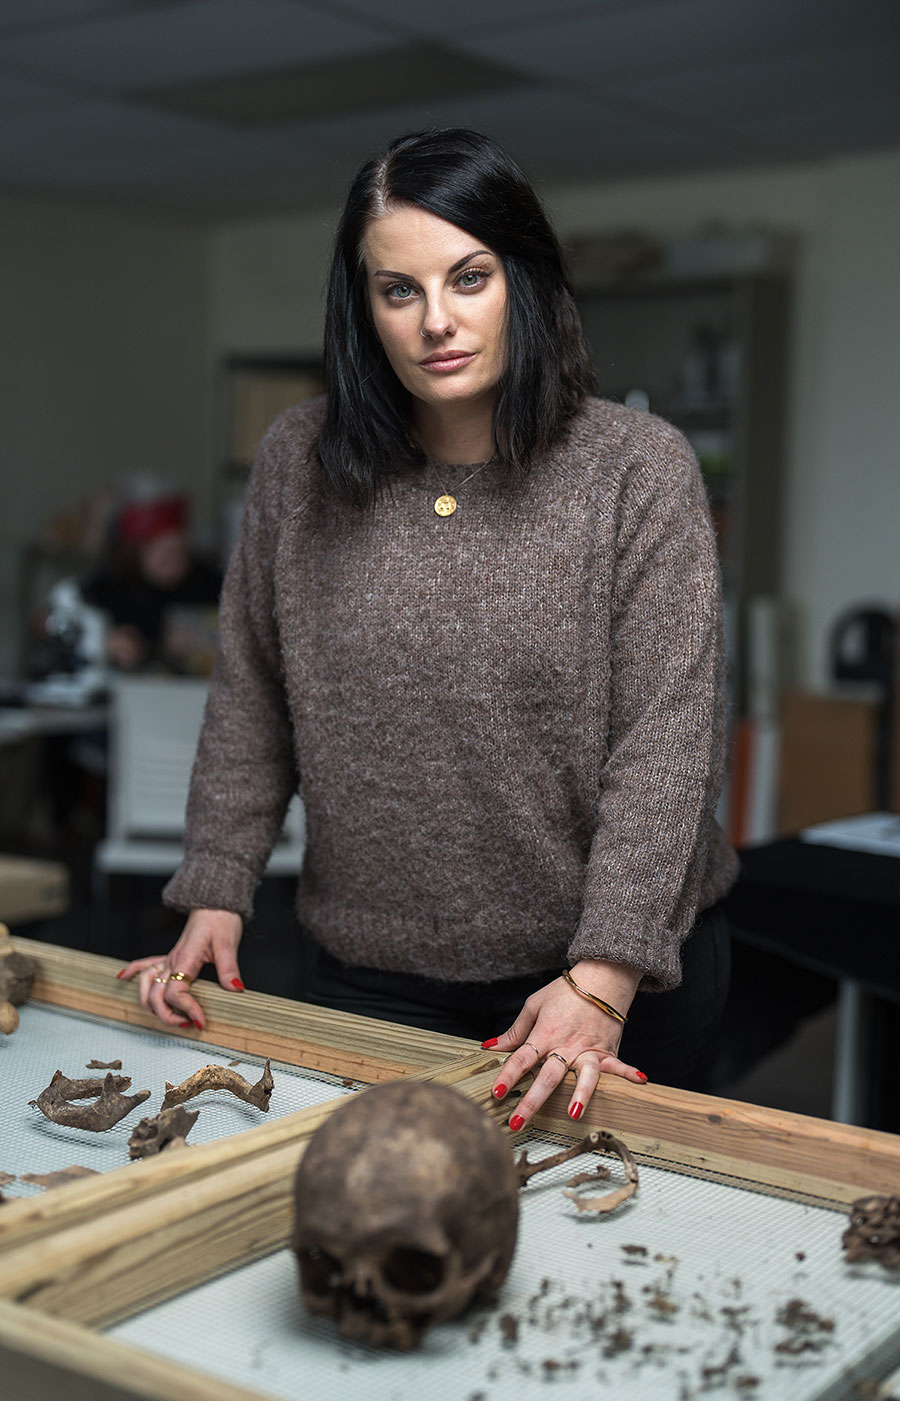 Amy Michael in brown sweater standing behind table with human skull and bone remnants